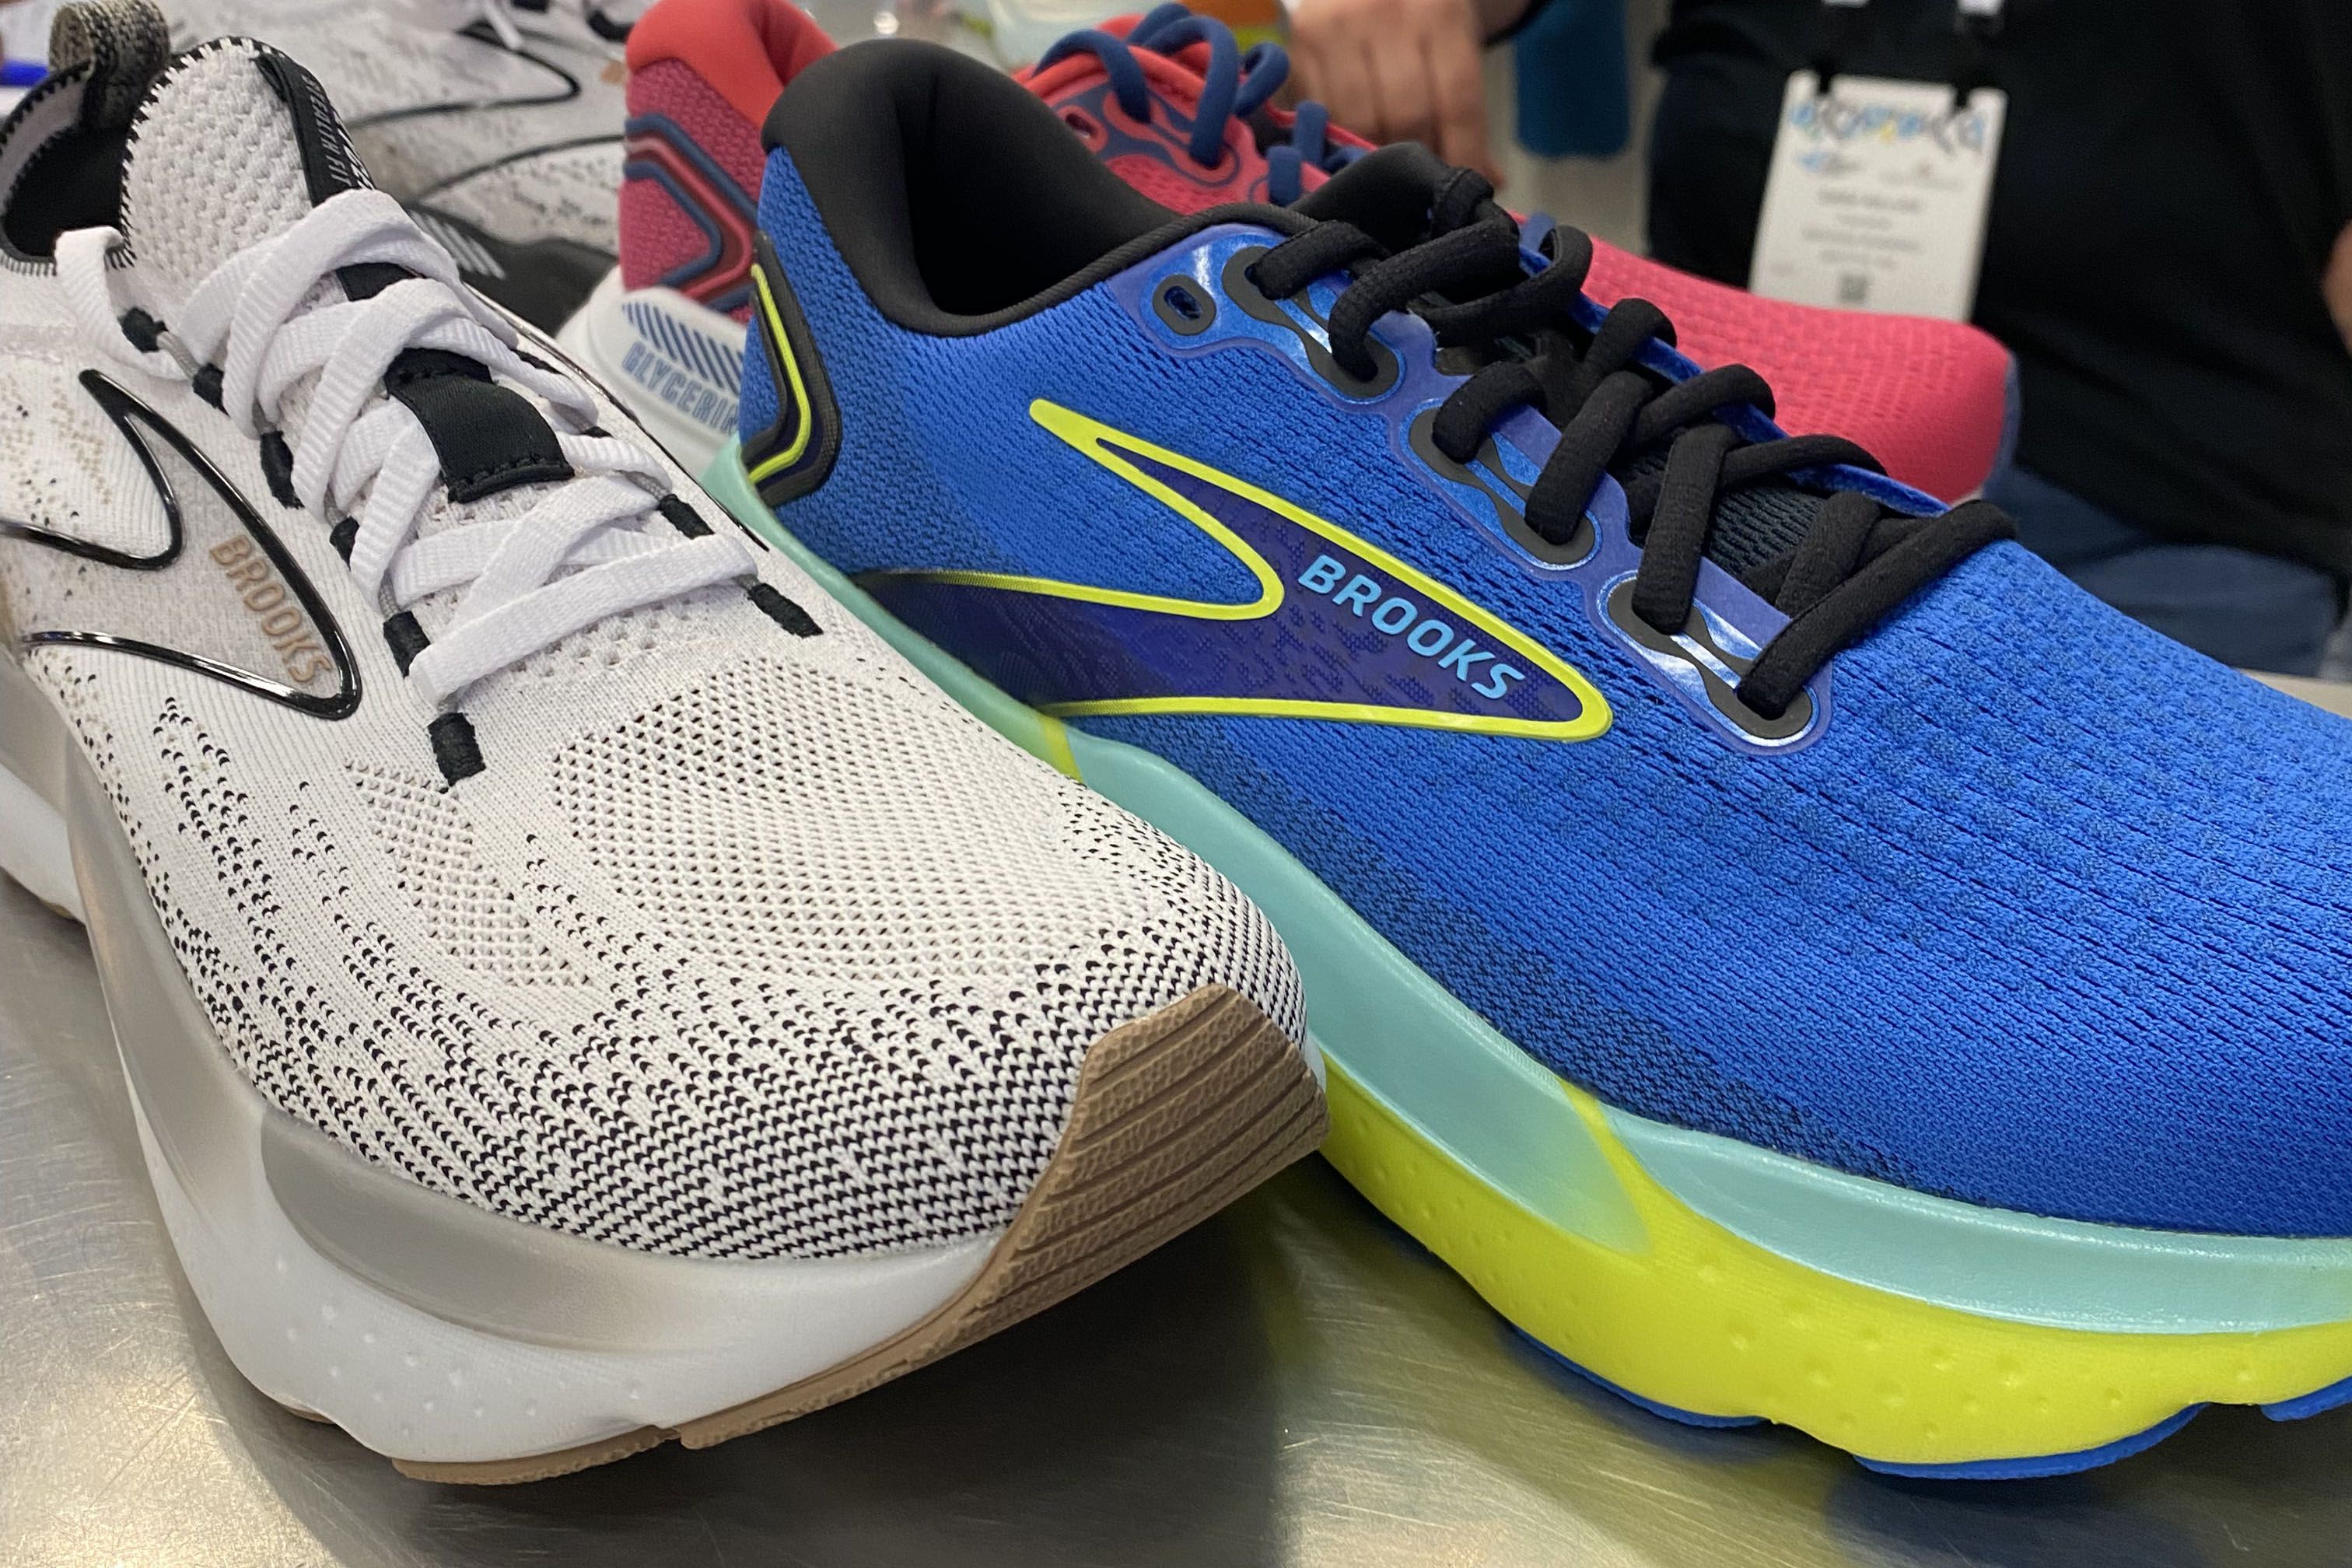 Nike Zoom Fly 5 Review | Tested & Rated